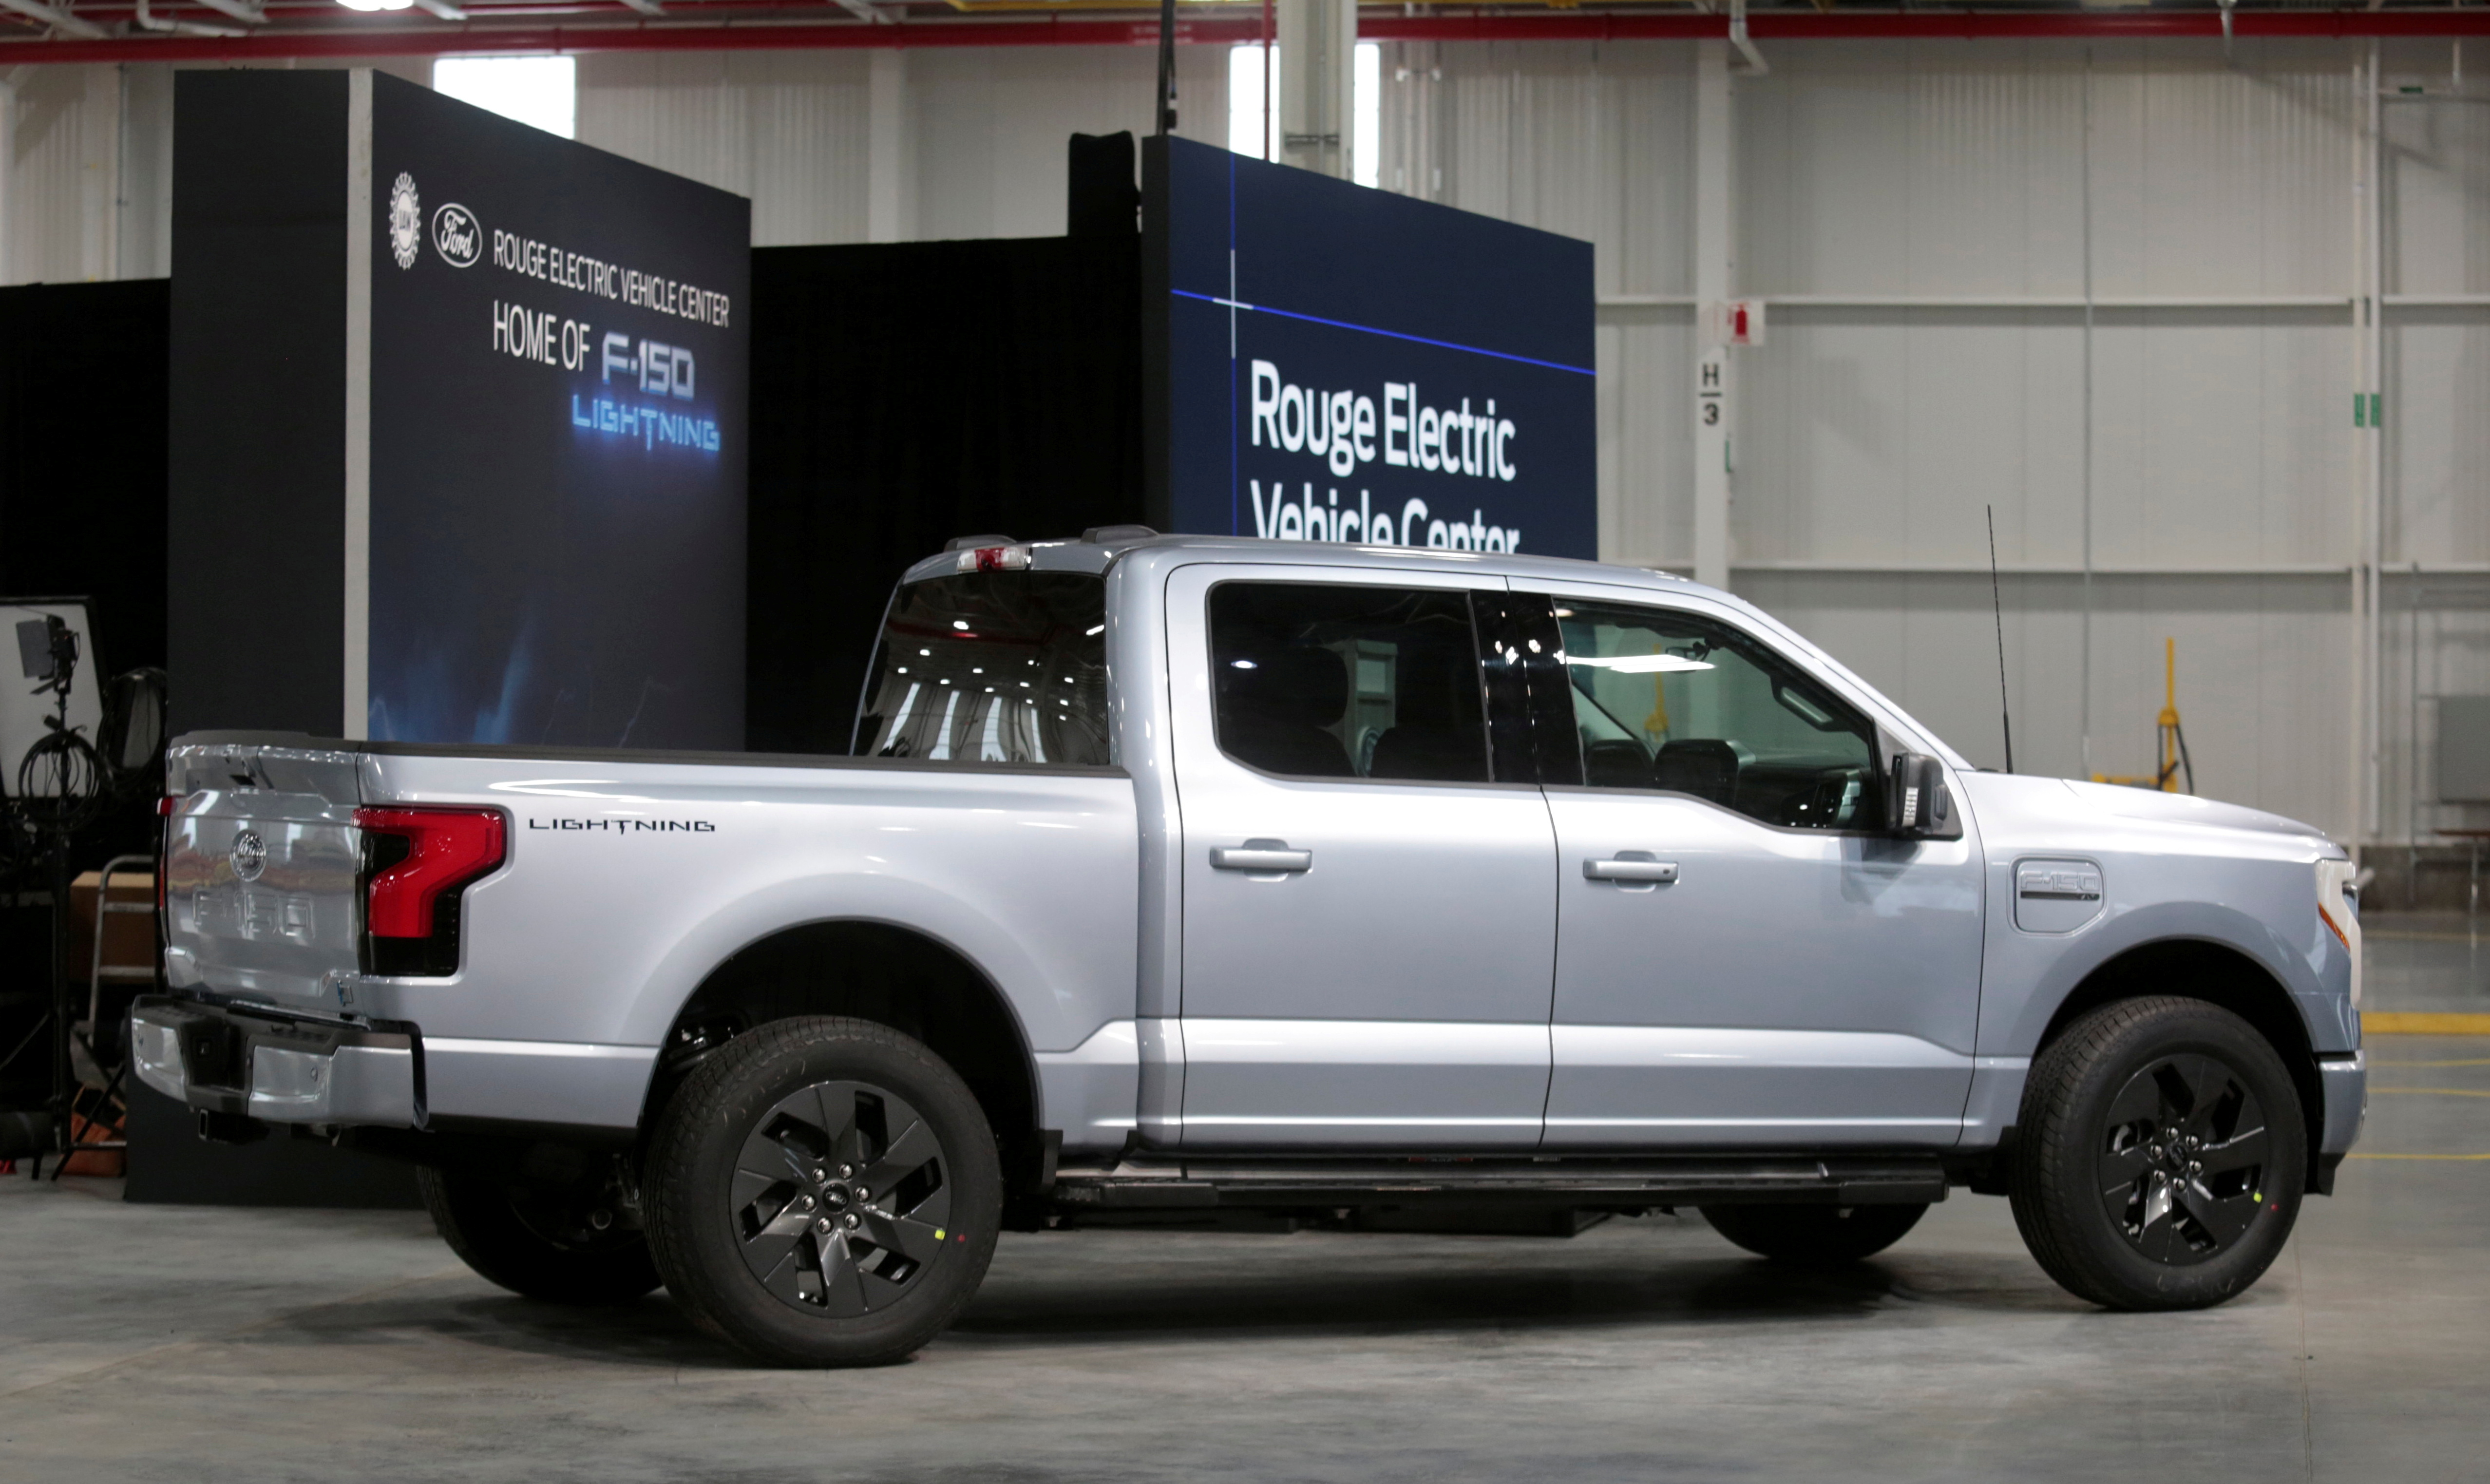 Ford Motors pre-production all-electric F-150 Lightning truck prototype